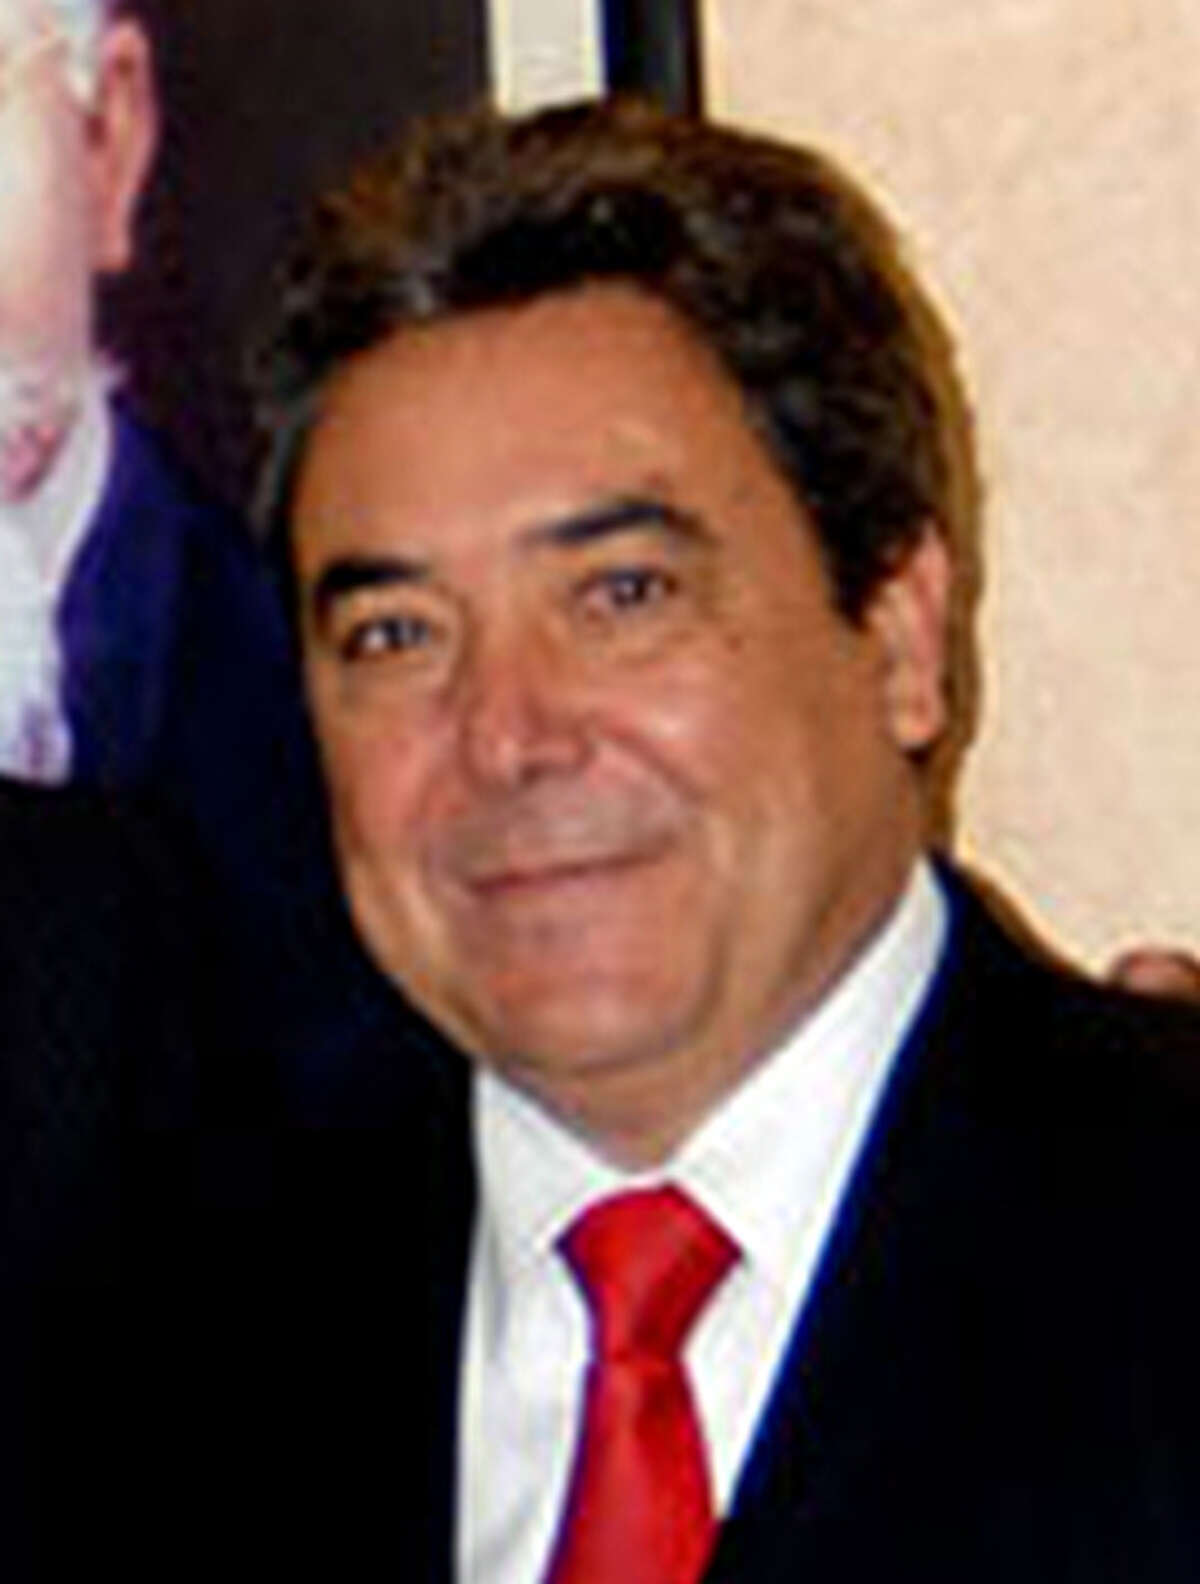 Jorge Juan Torres Lopez, 59, was the interim governor of Coahuila in 2011. He left office when it was discovered that the state was hundreds of millions of dollars in debt